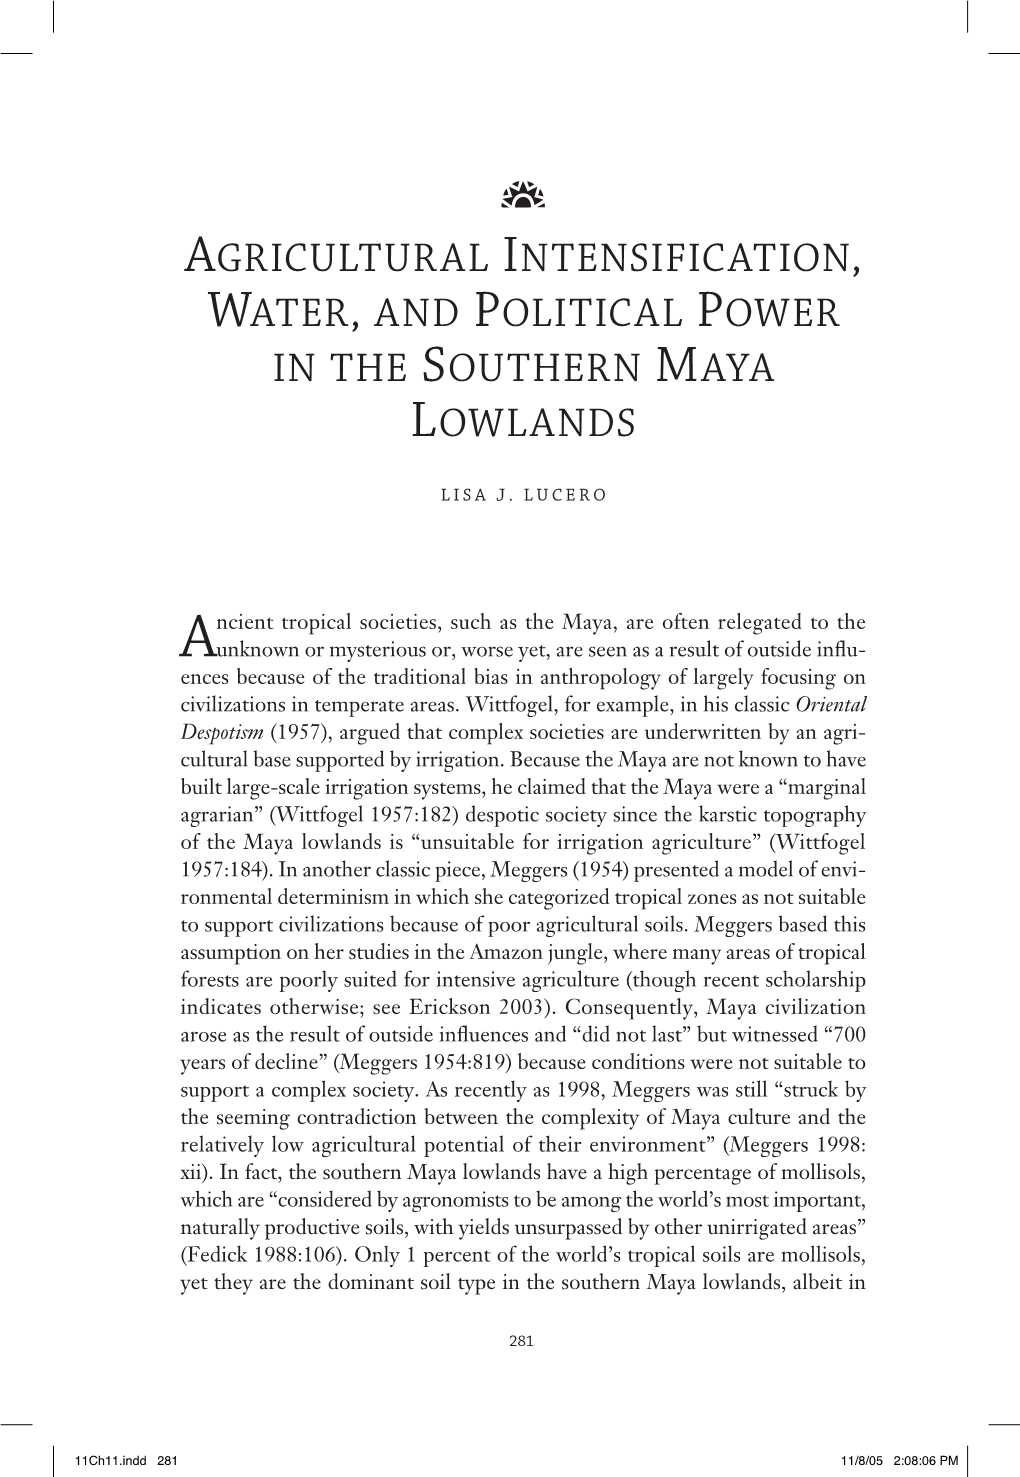 2006 “Agricultural Intensification, Water, and Political Power in The